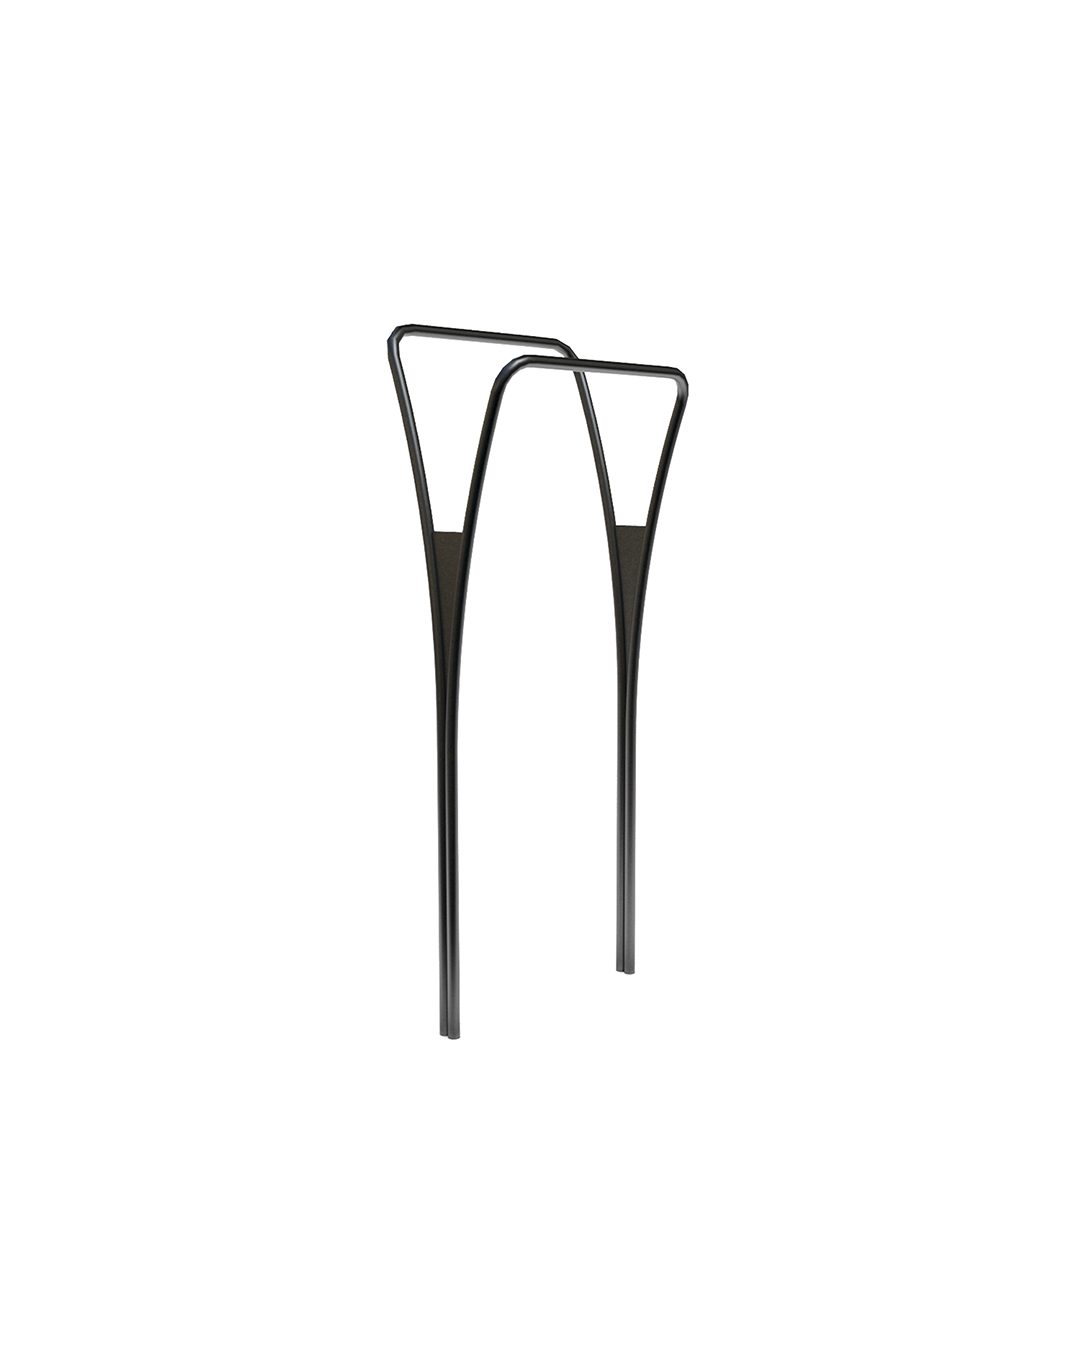 Durable outdoor exercise and stretching equipment in a minimalistic design.